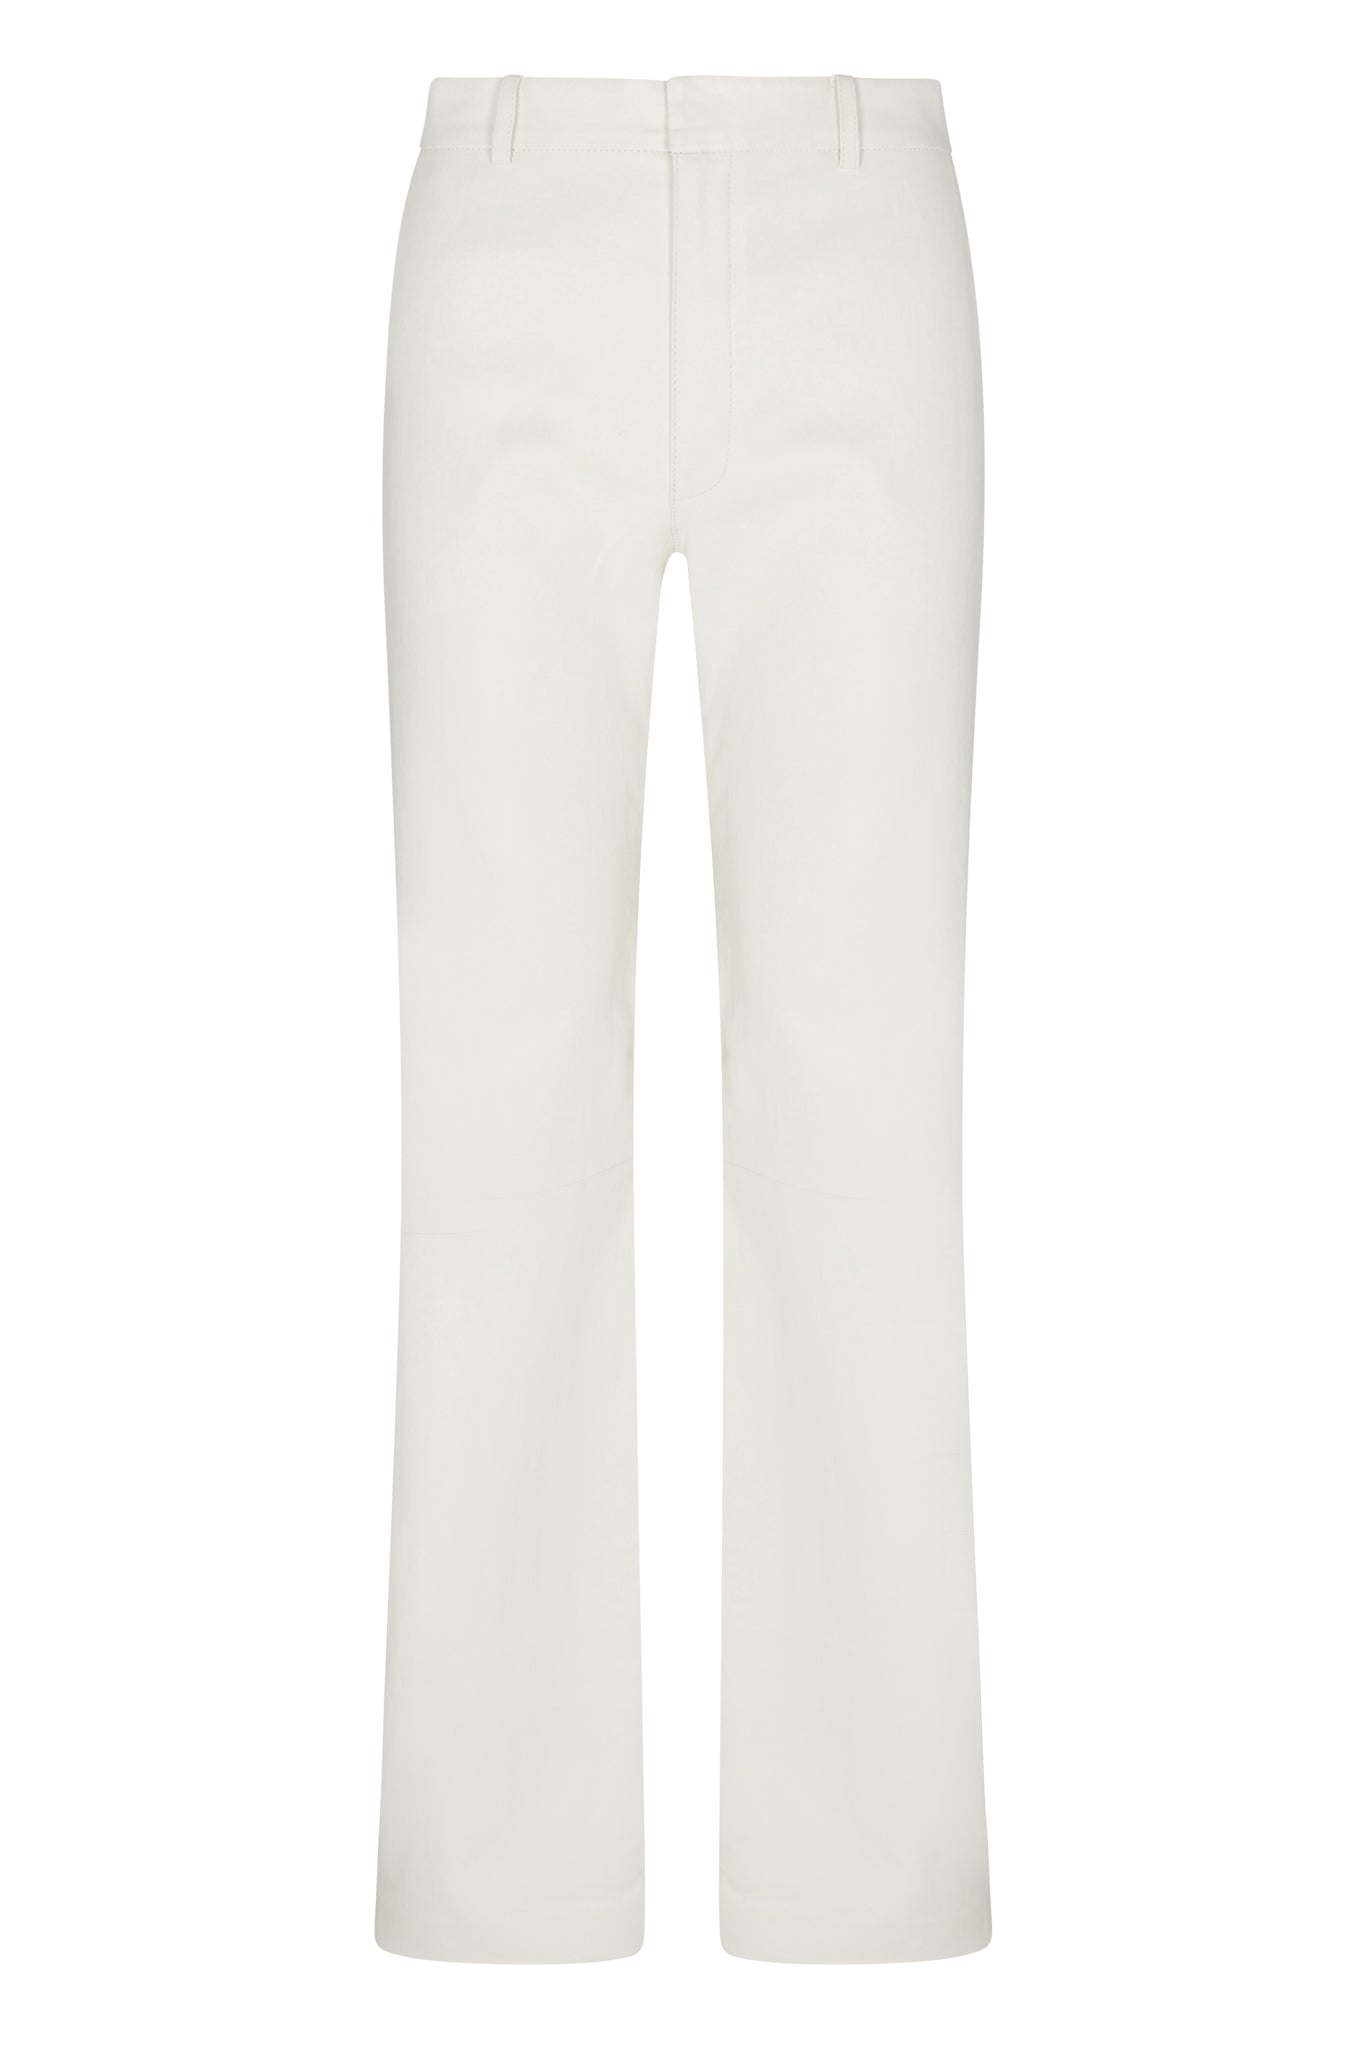 White Leather Baggy Low Rise Trousers